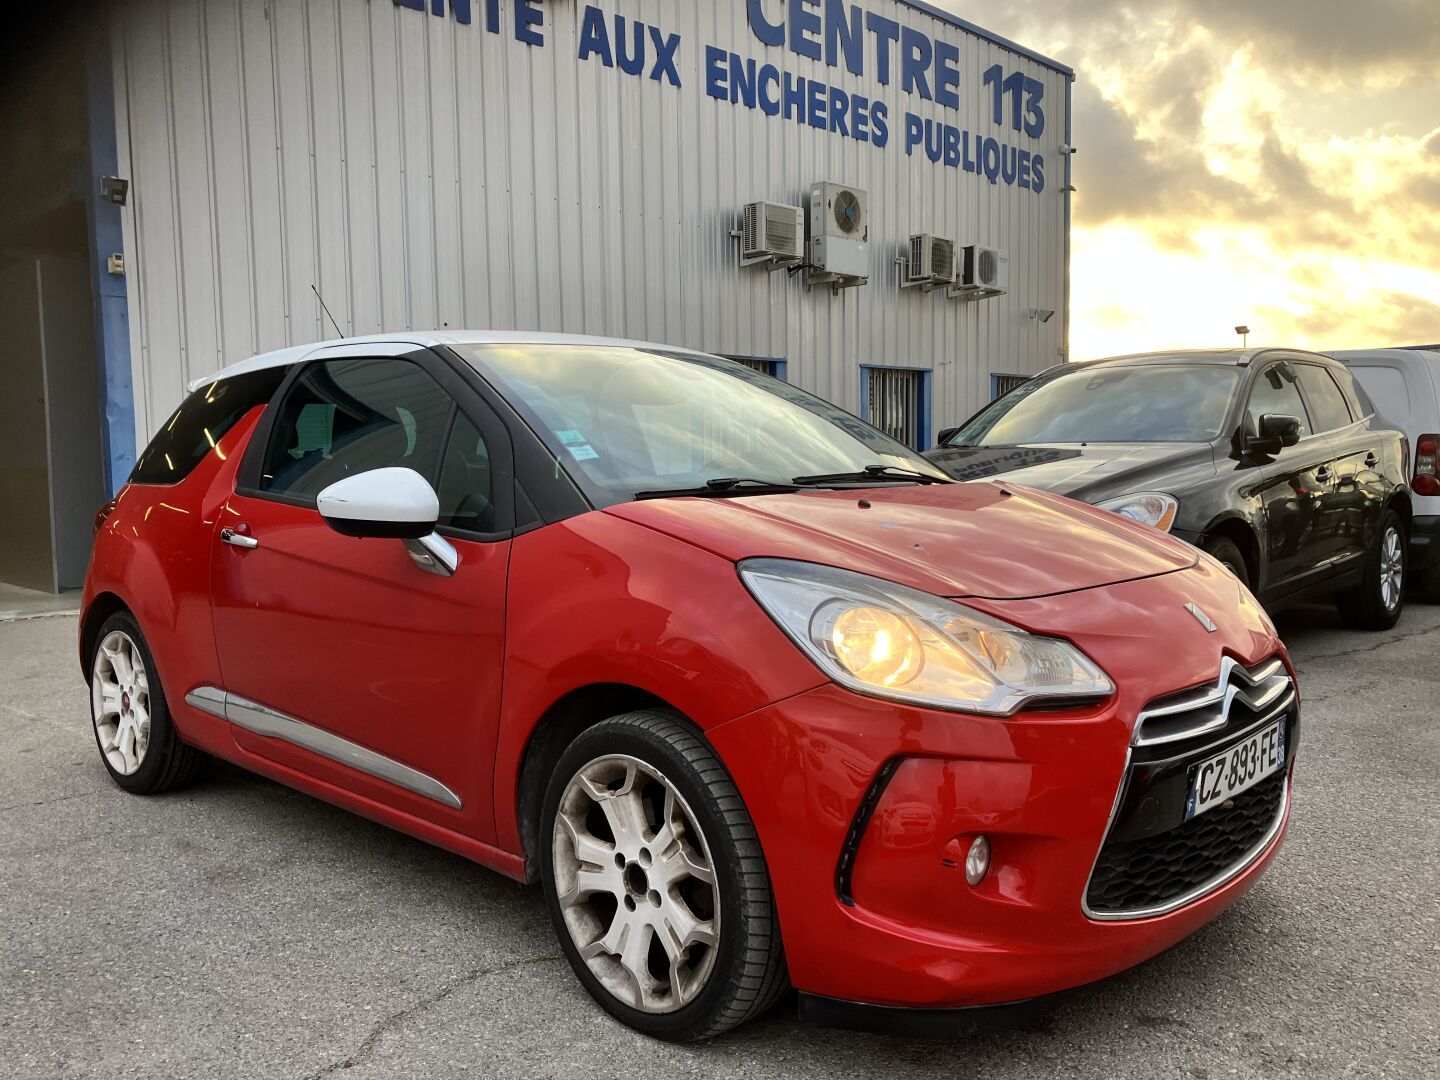 Null DS3 1.6 L 110 HP
VP CITROEN DS3 1.6 L 110 CH 
Body : CI
Serial number : VF7&hellip;